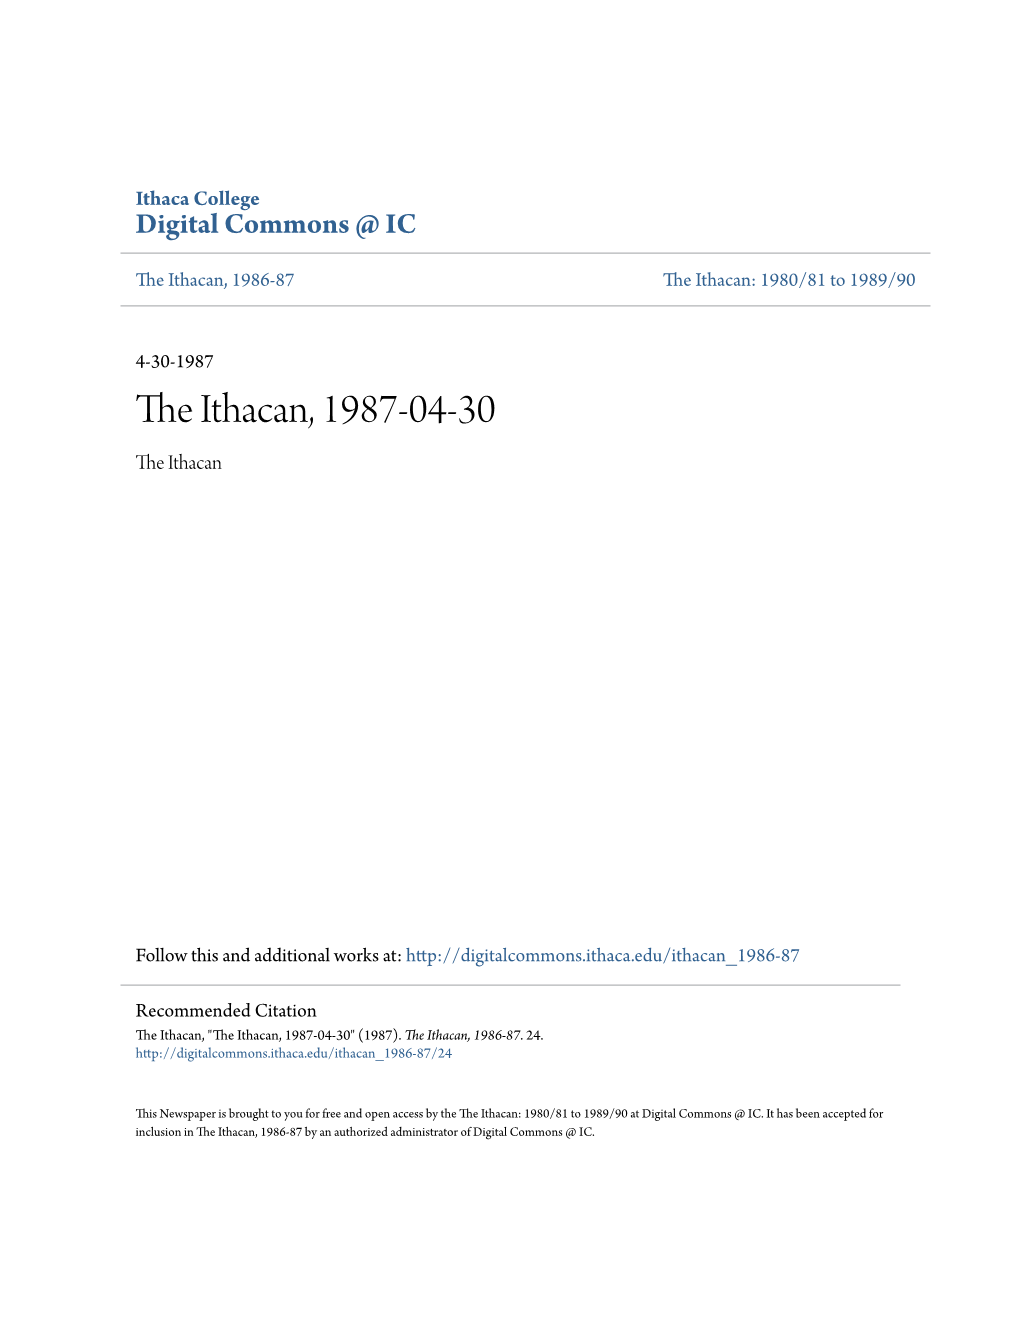 The Ithacan, 1987-04-30